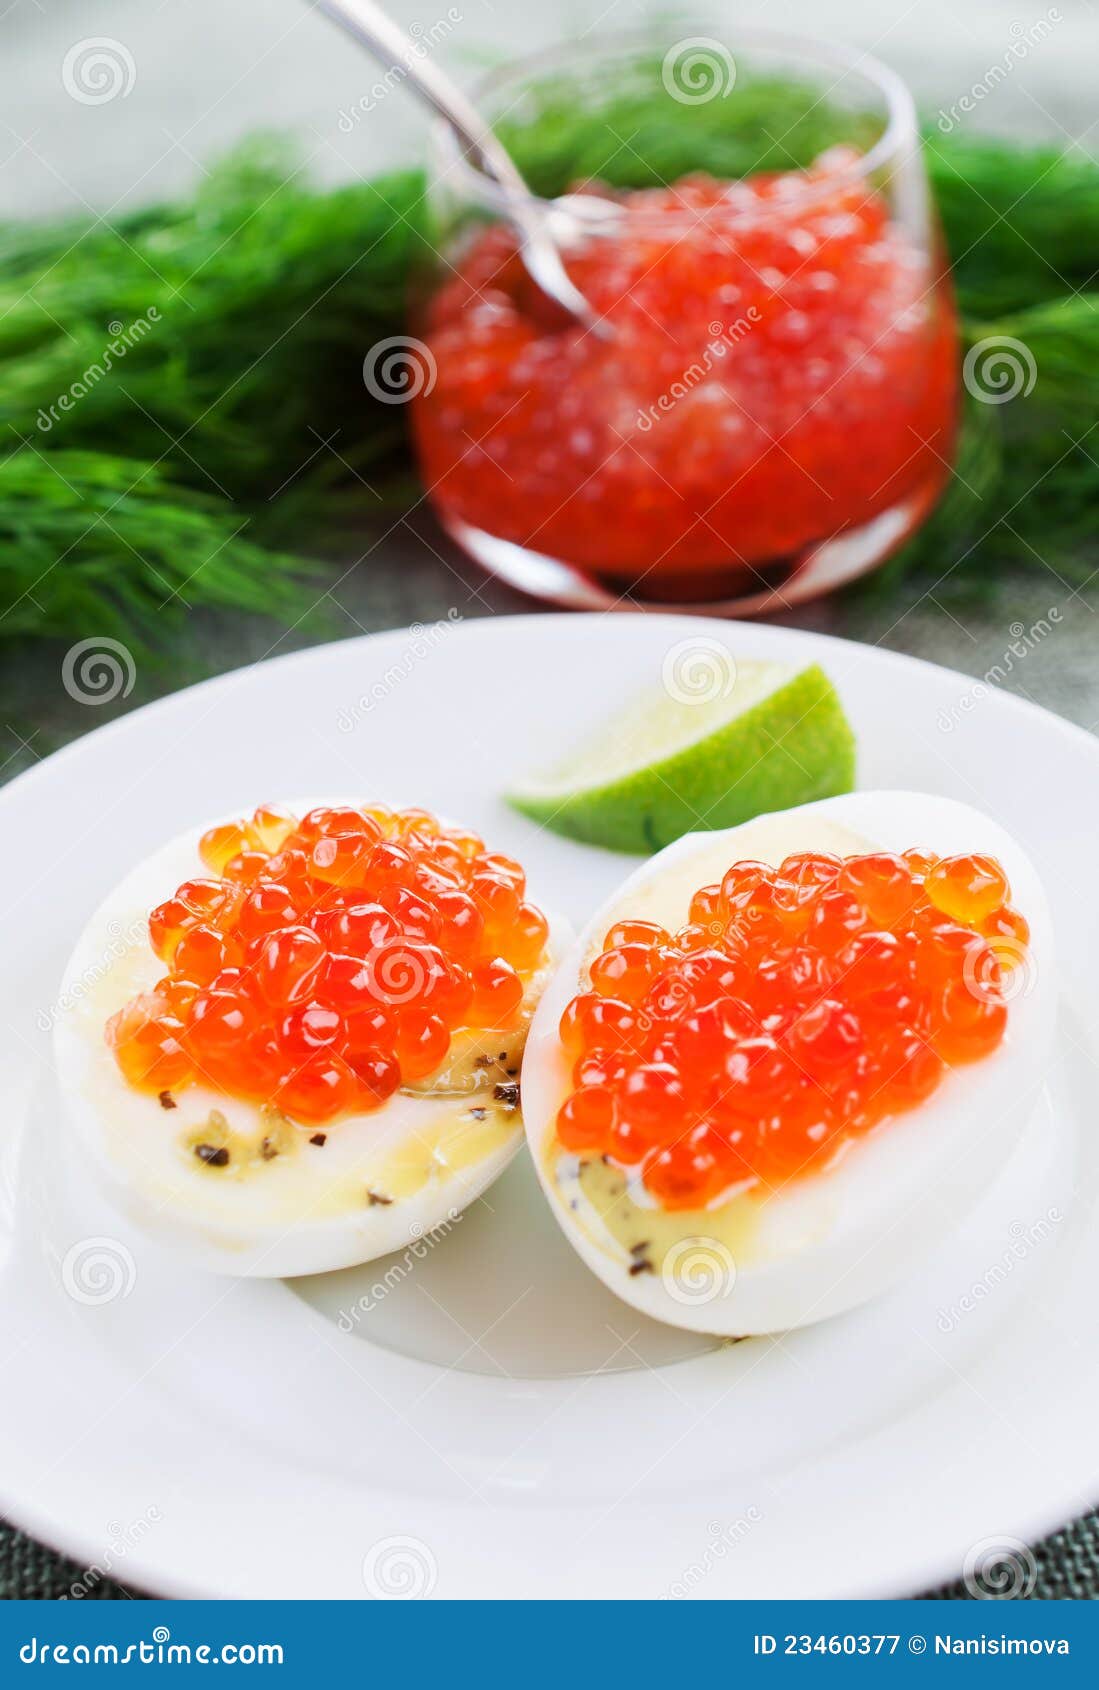 Eggs and caviar stock image. Image of appetizer, food - 23460377